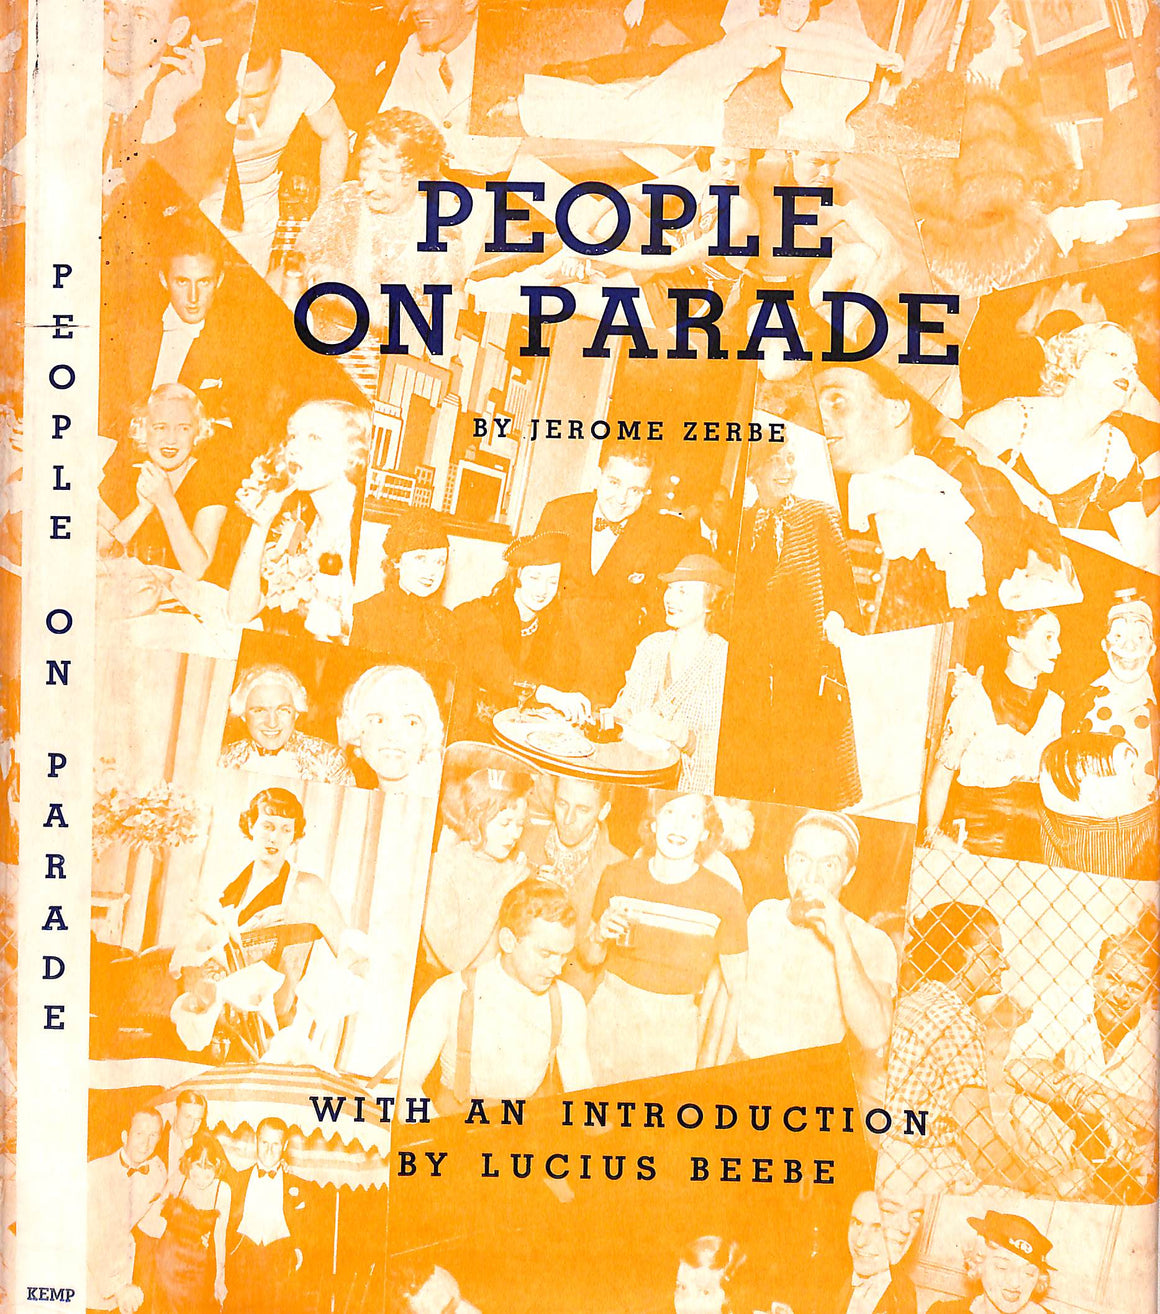 "People On Parade" 1934 ZERBE, Jerome